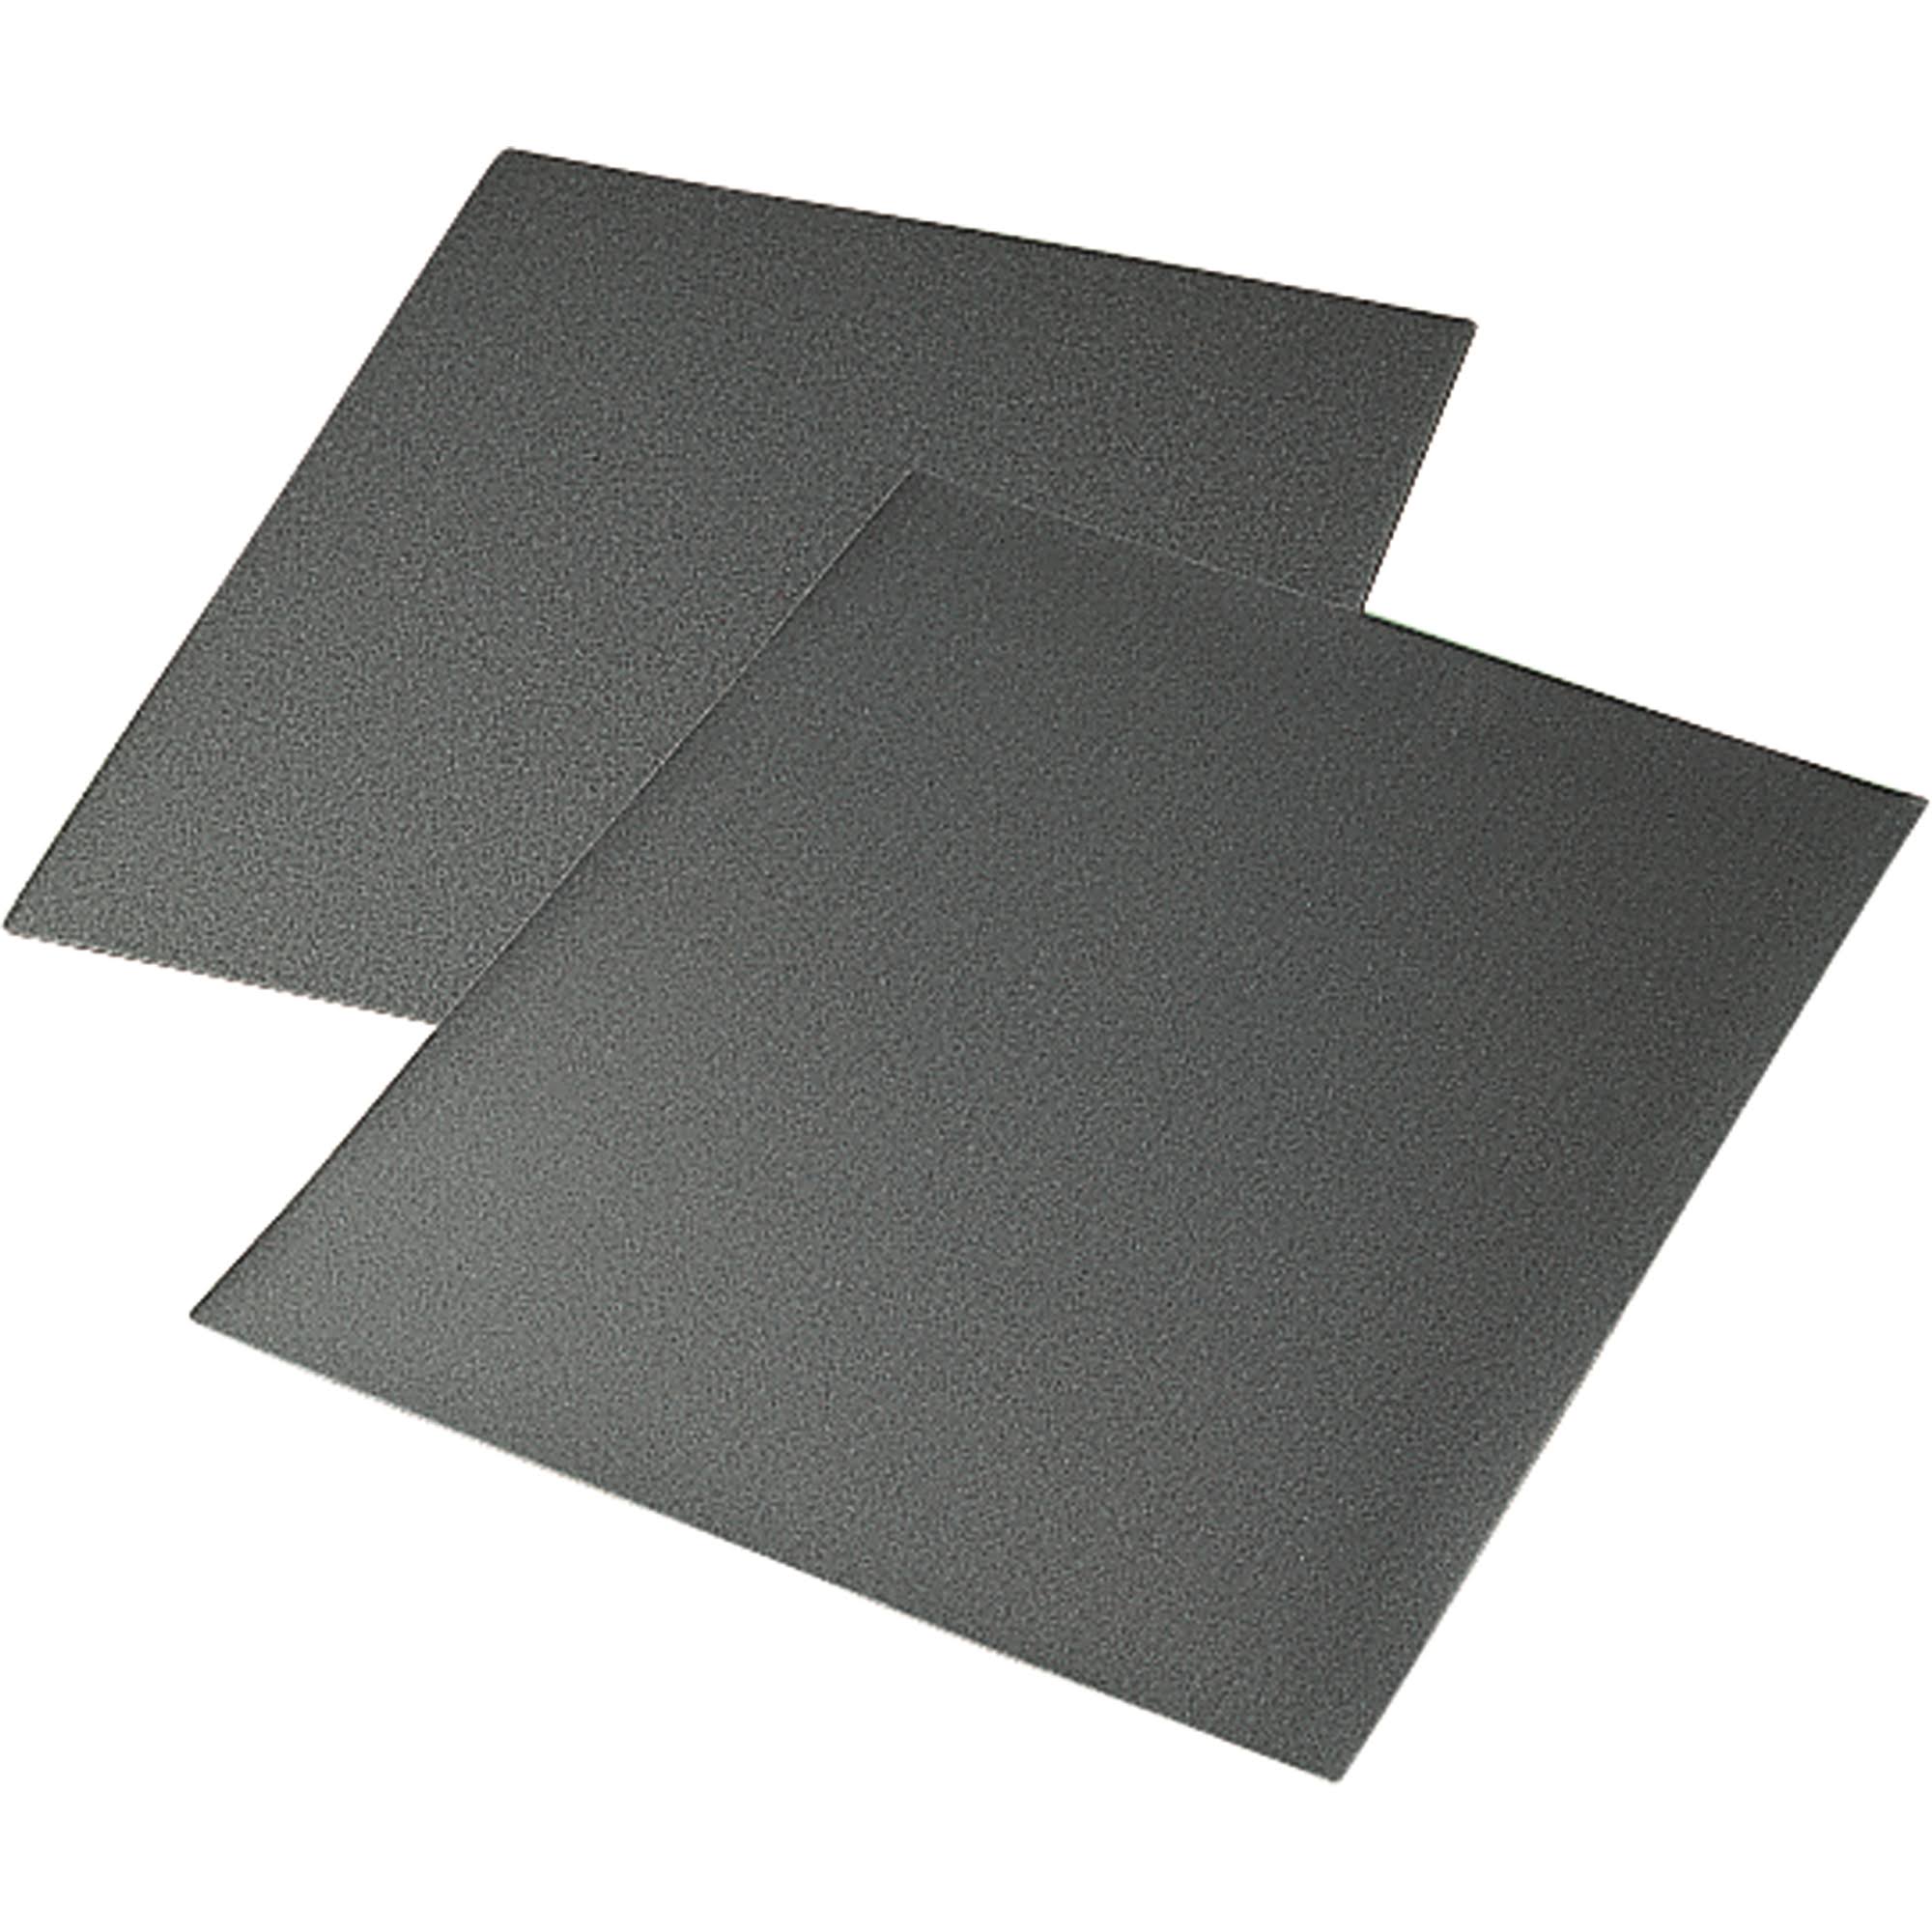 3M Wet or Dry Sanding Sheets - 120c-grit, 9" x 11"